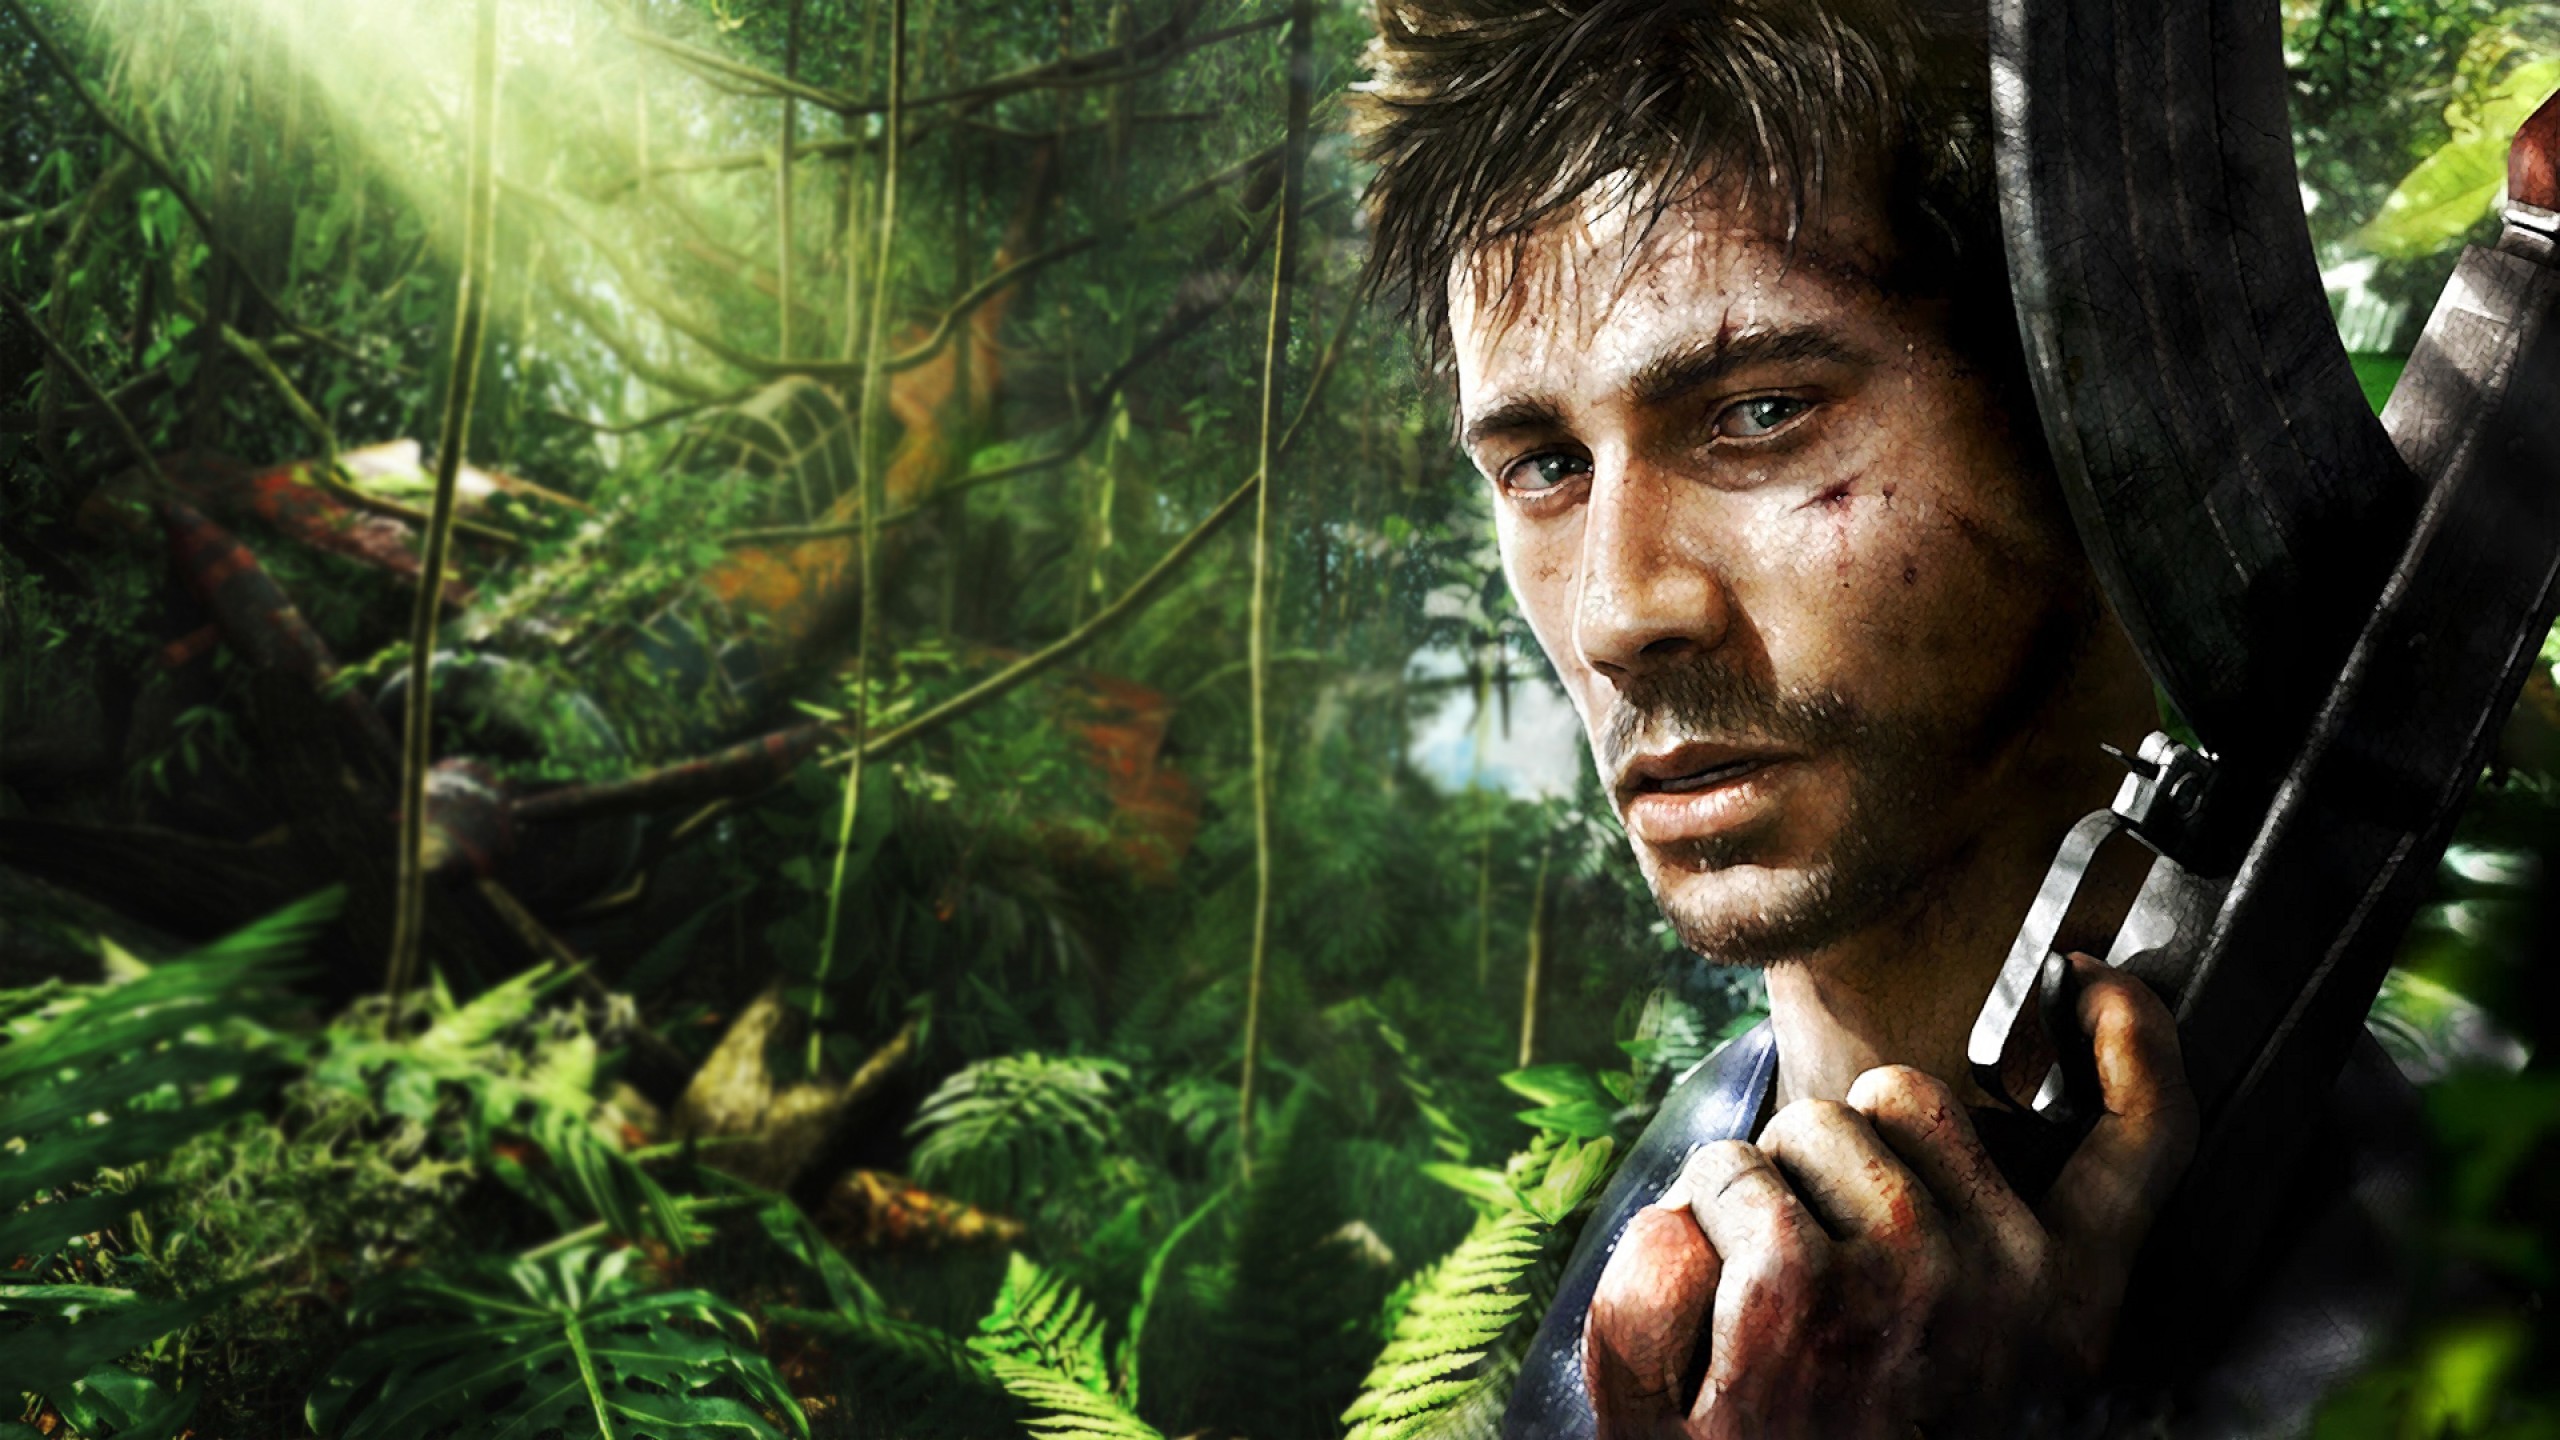 90+ Far Cry 3 HD Wallpapers and Backgrounds